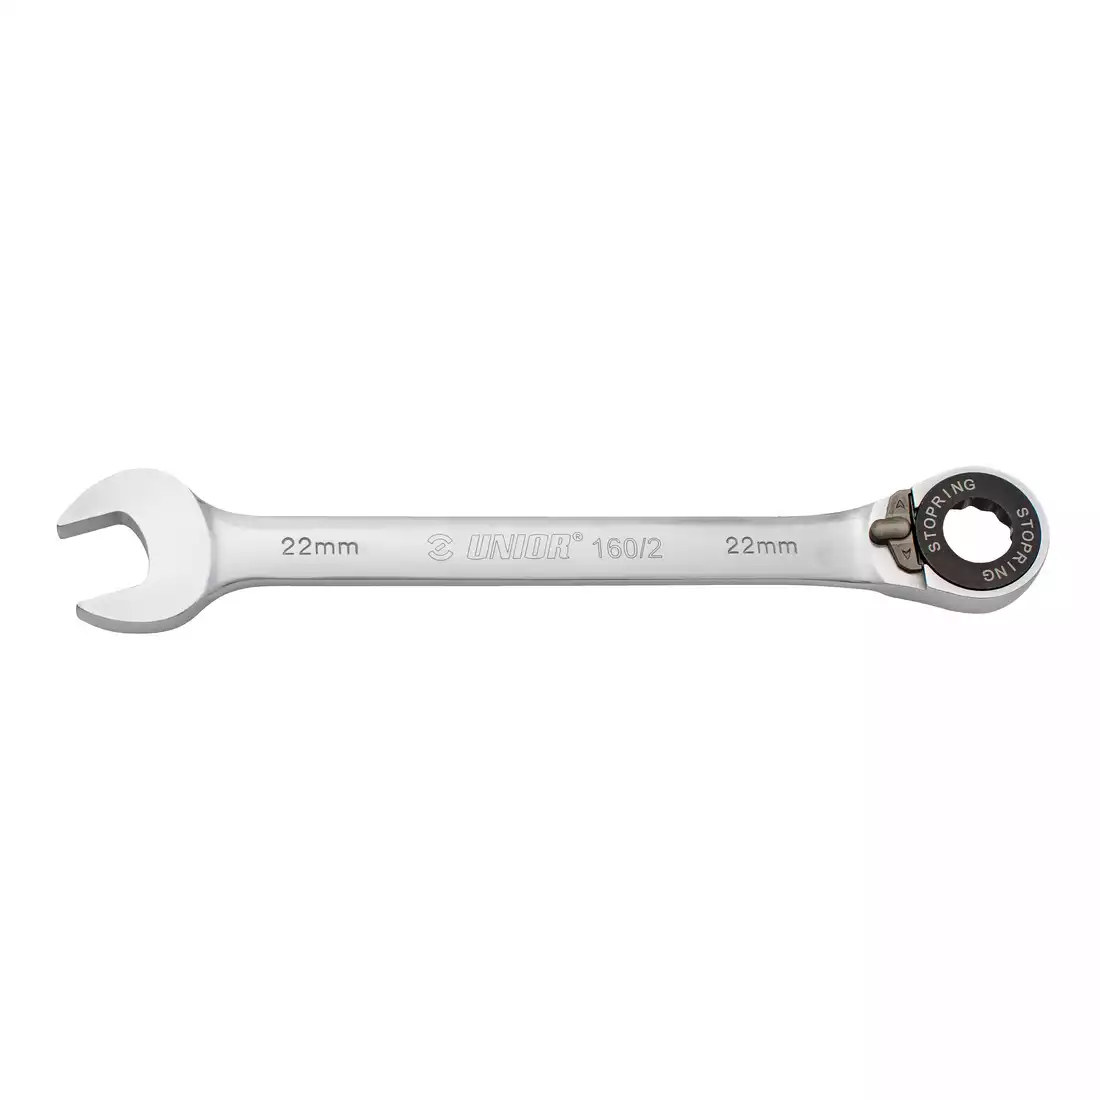 UNIOR combination wrench with ratchet size 13